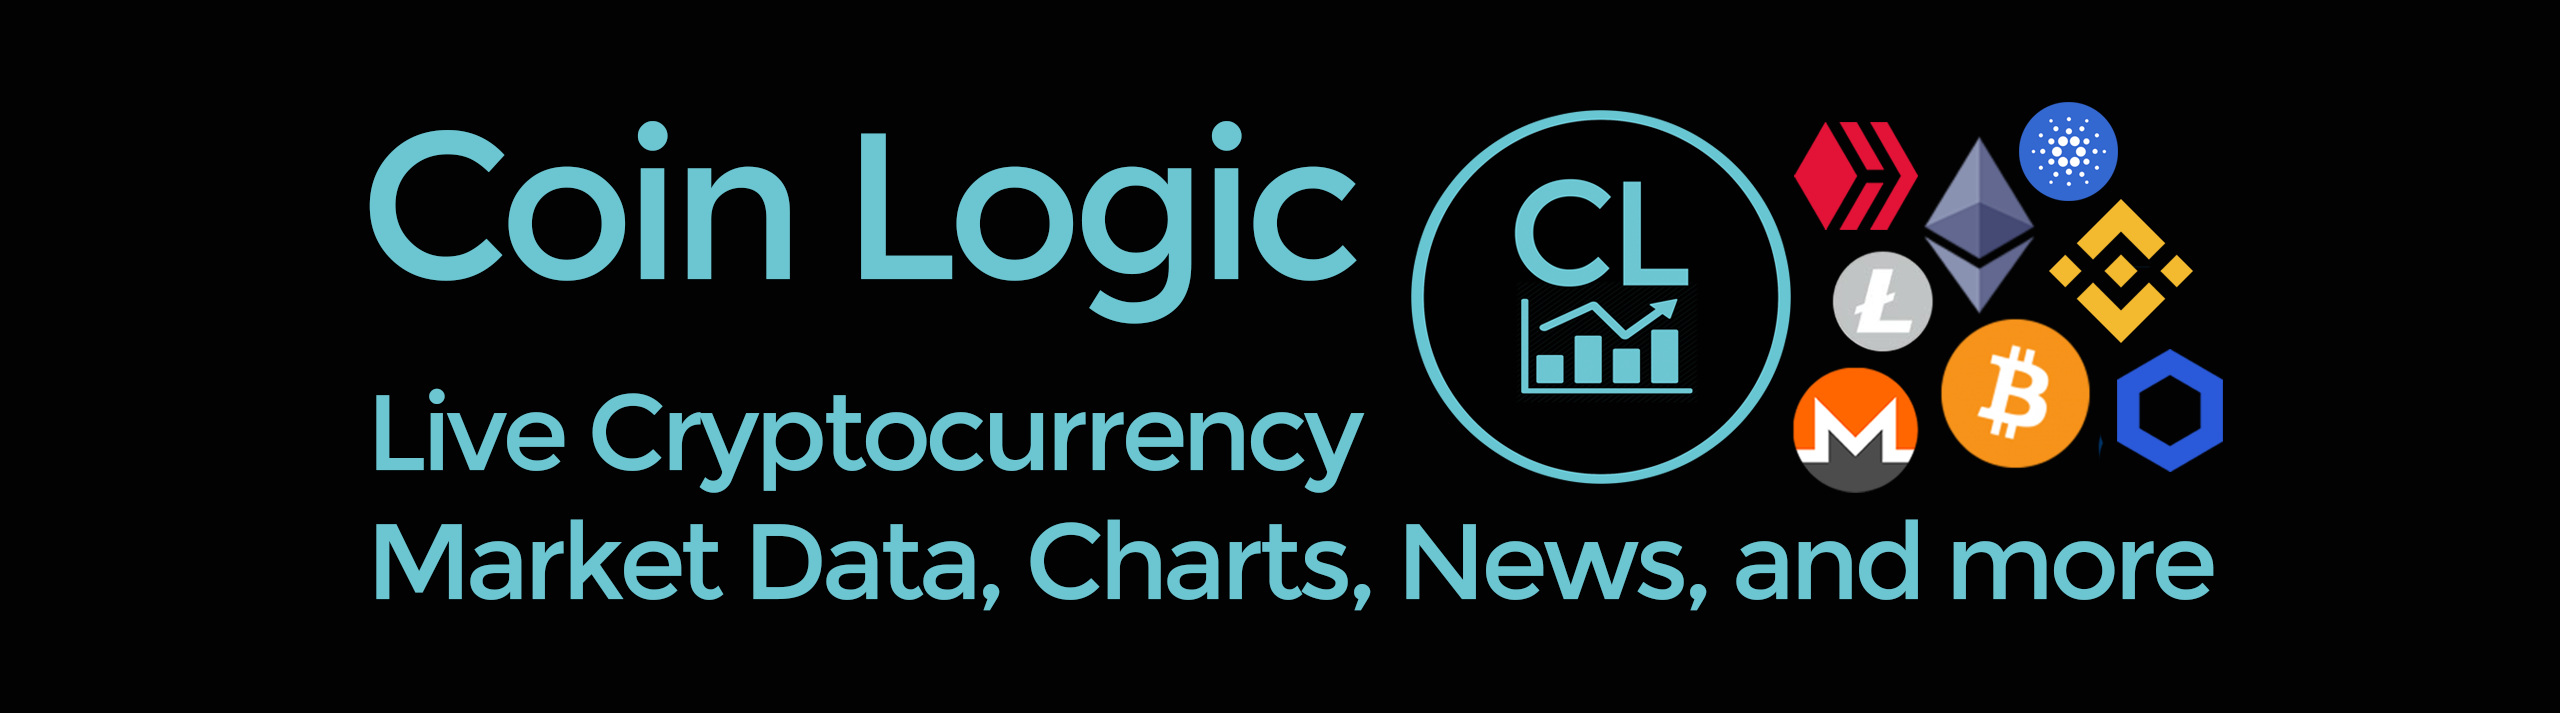 Congress Shaping Crypto Regulations Coin Logic banner